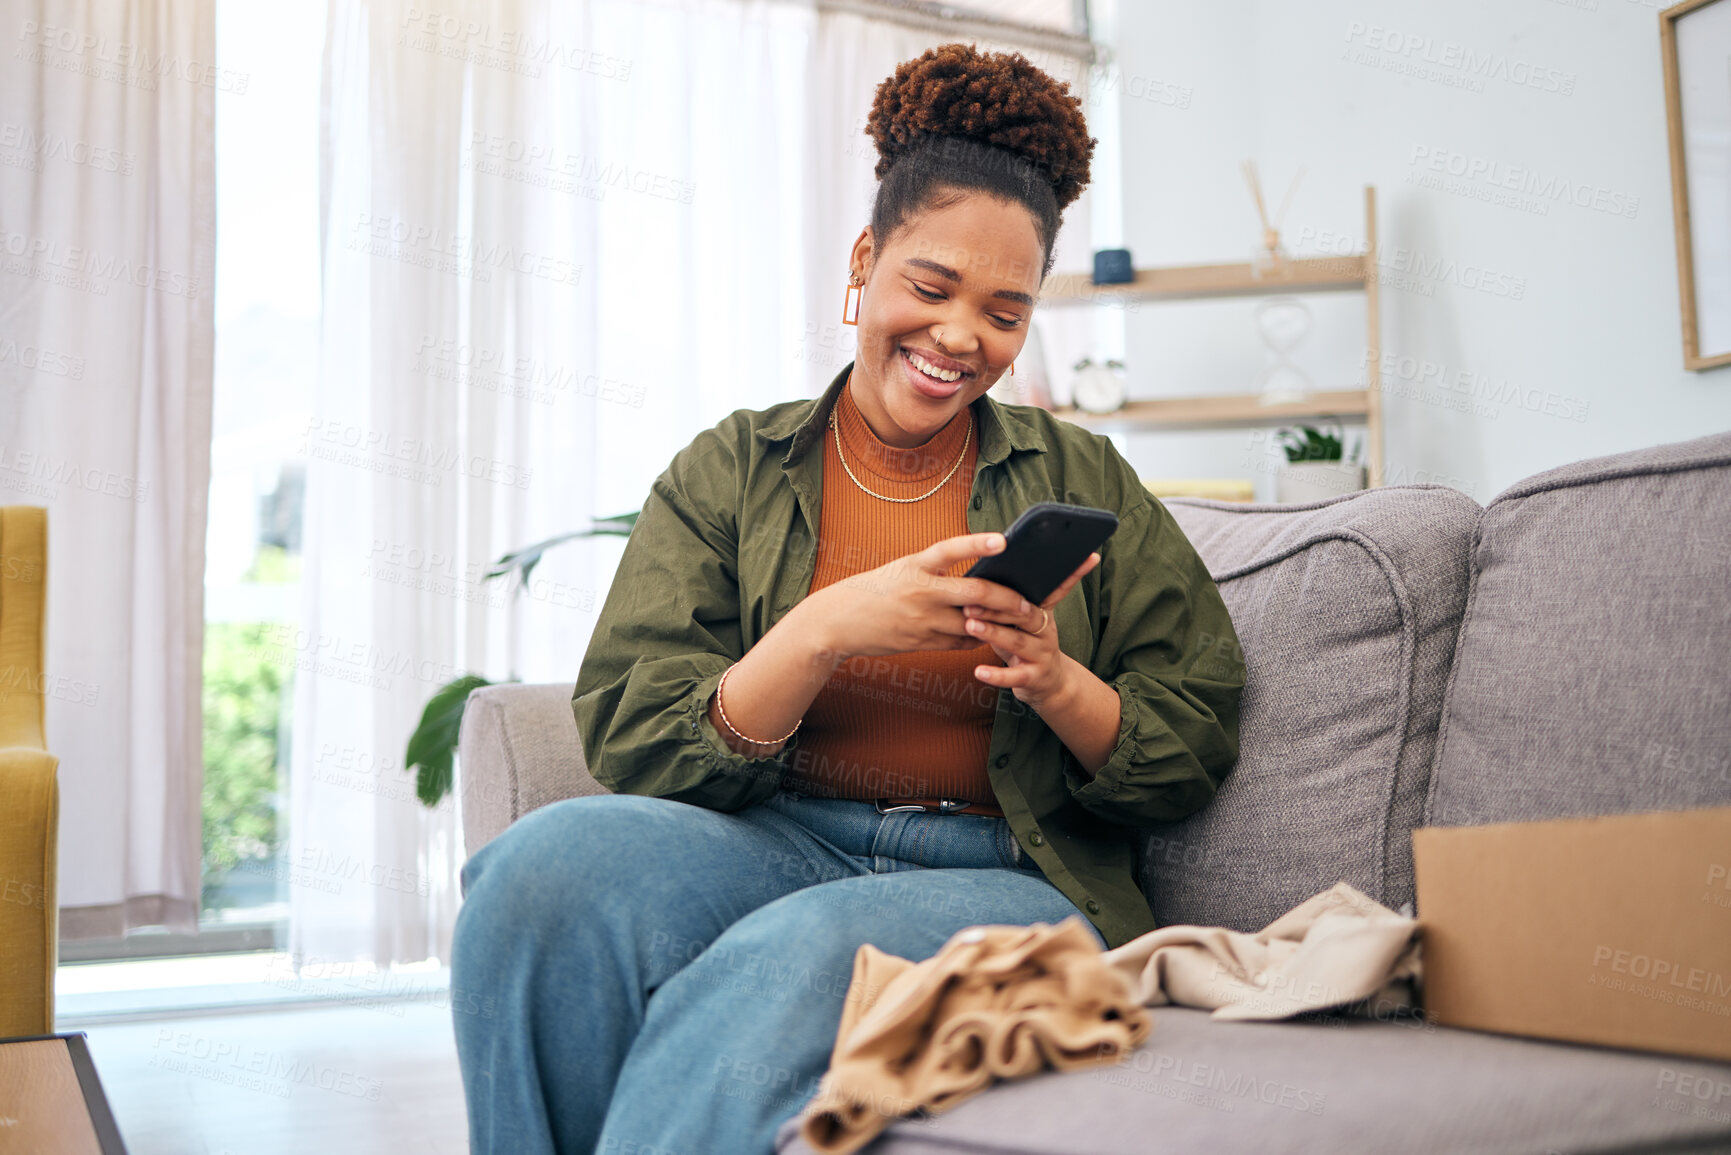 Buy stock photo Online shopping, delivery and black woman with phone on sofa happy with package or product at home. Ecommerce, smile and African lady with smartphone for customer experience, survey or app in house